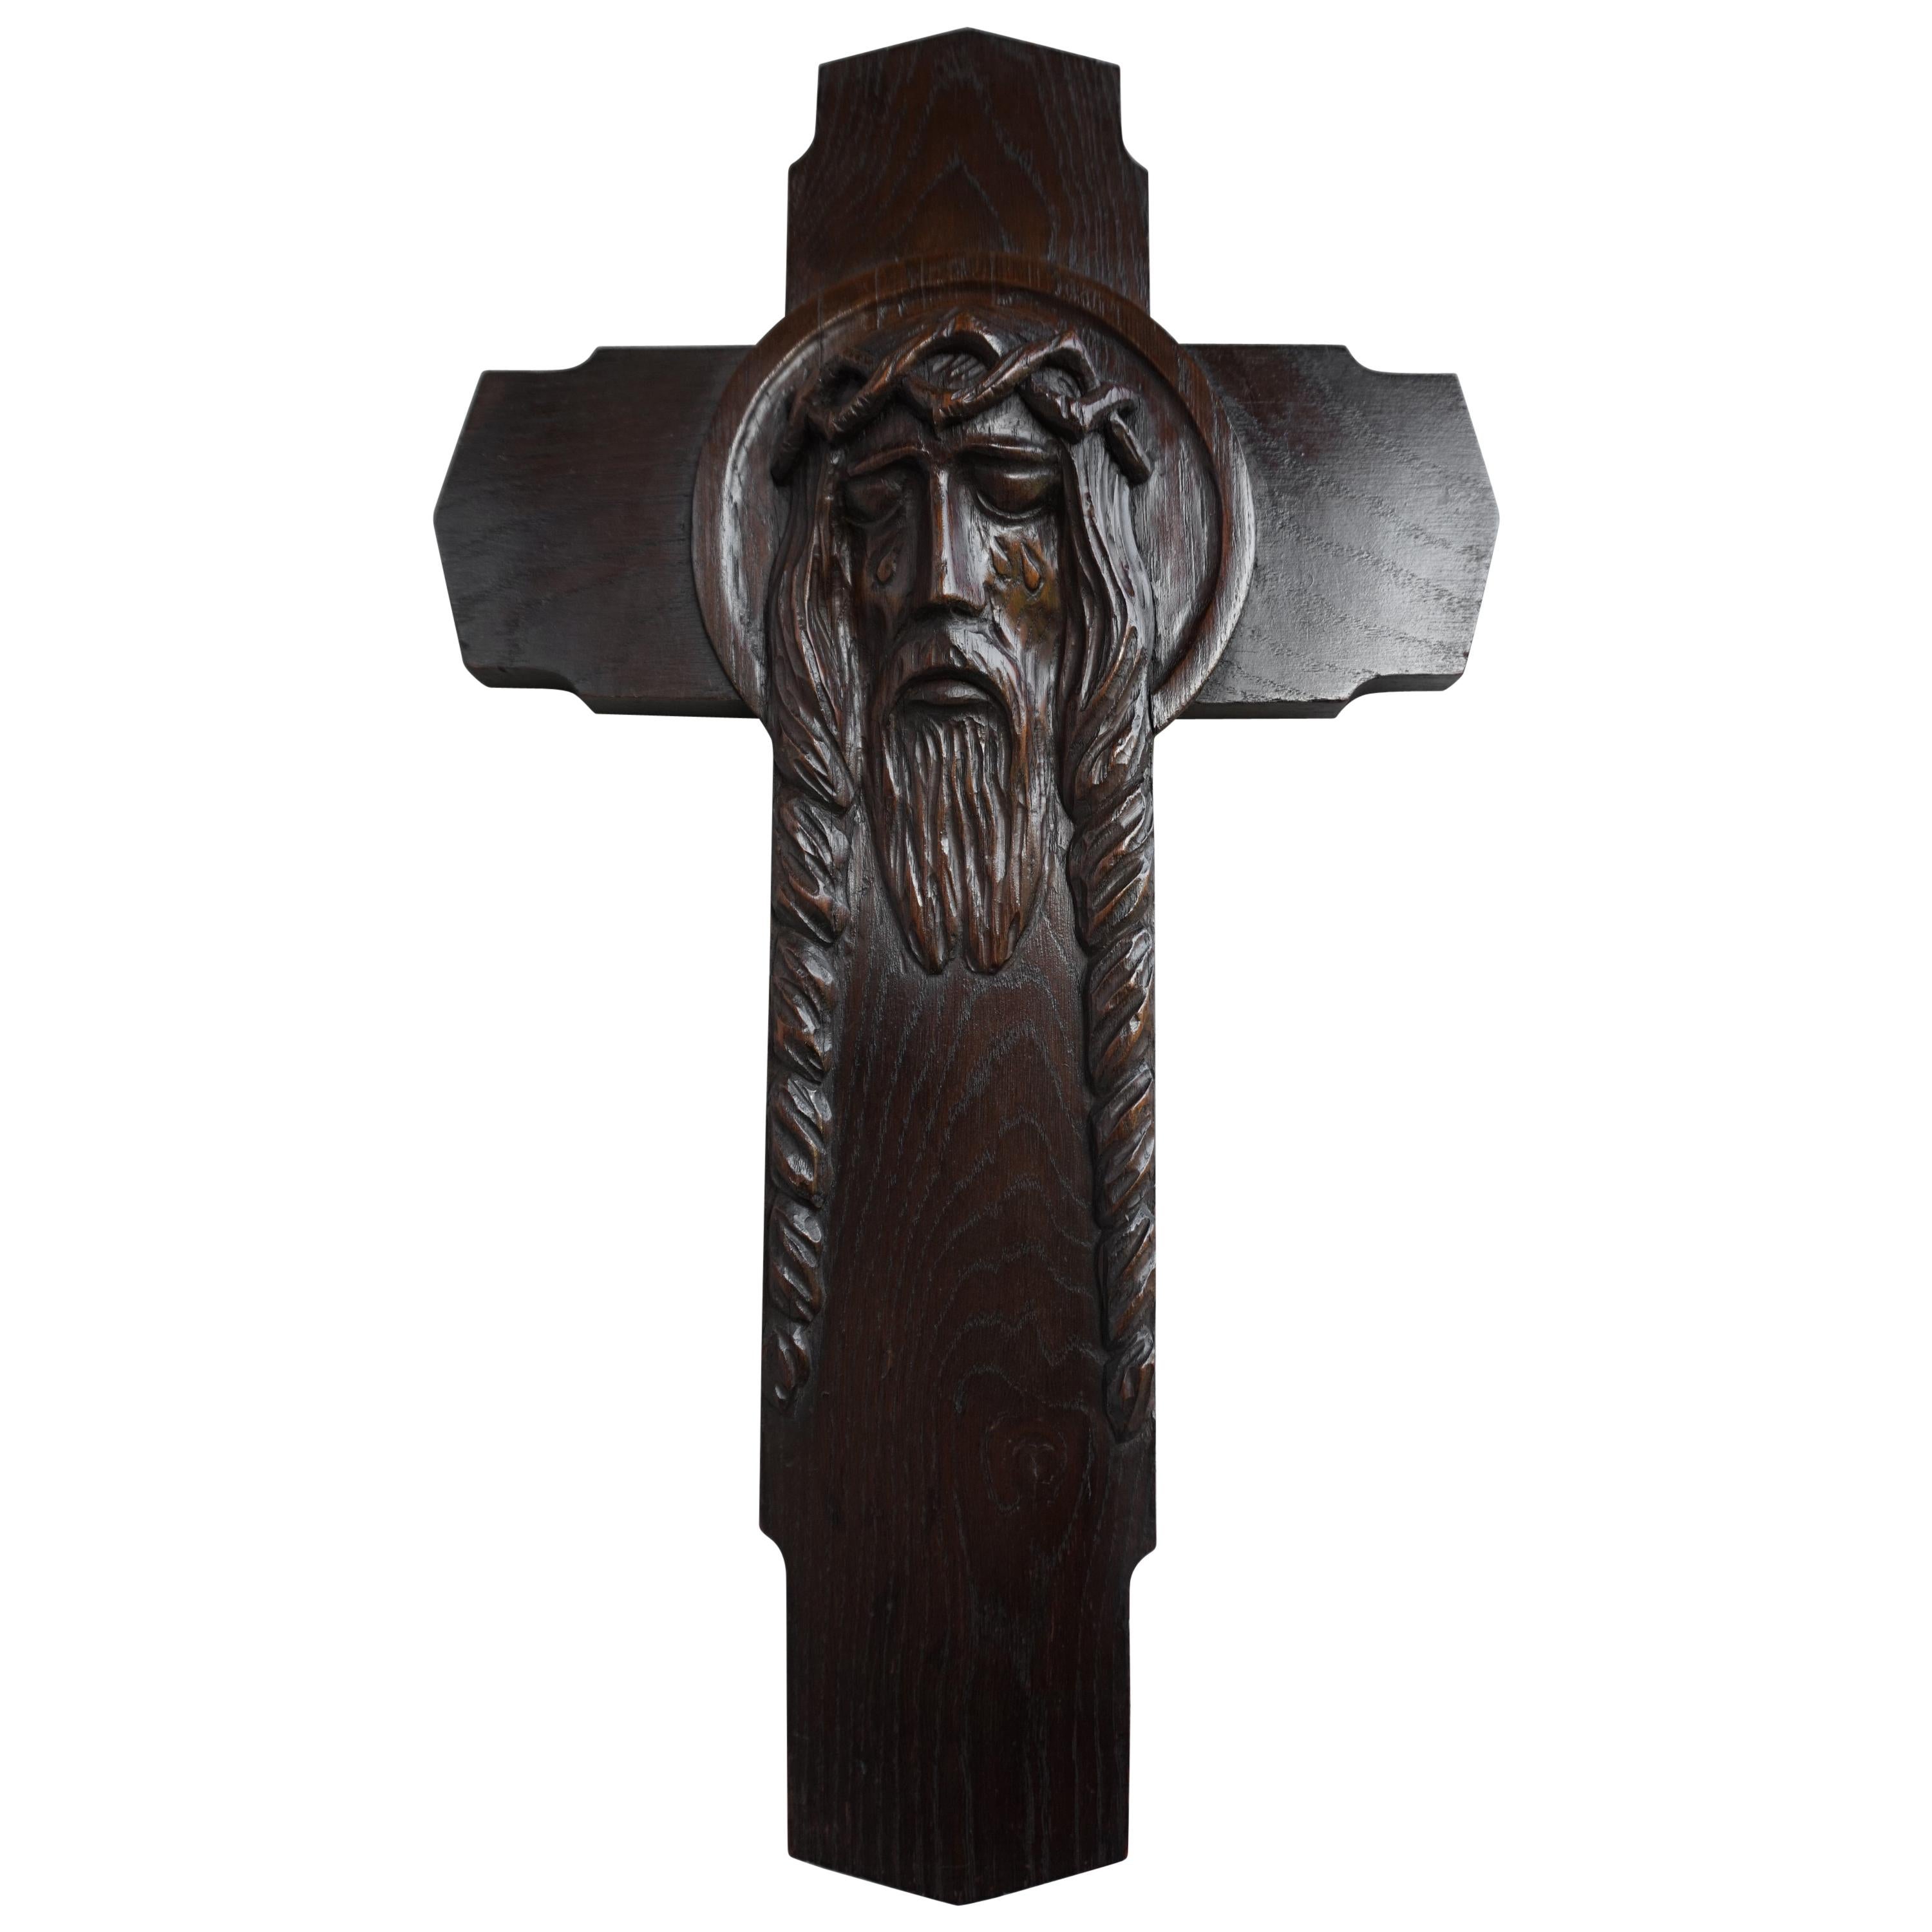 Unique Hand Carved Art Deco Wall Crucifix w. Suffering Christ in Tears Sculpture For Sale